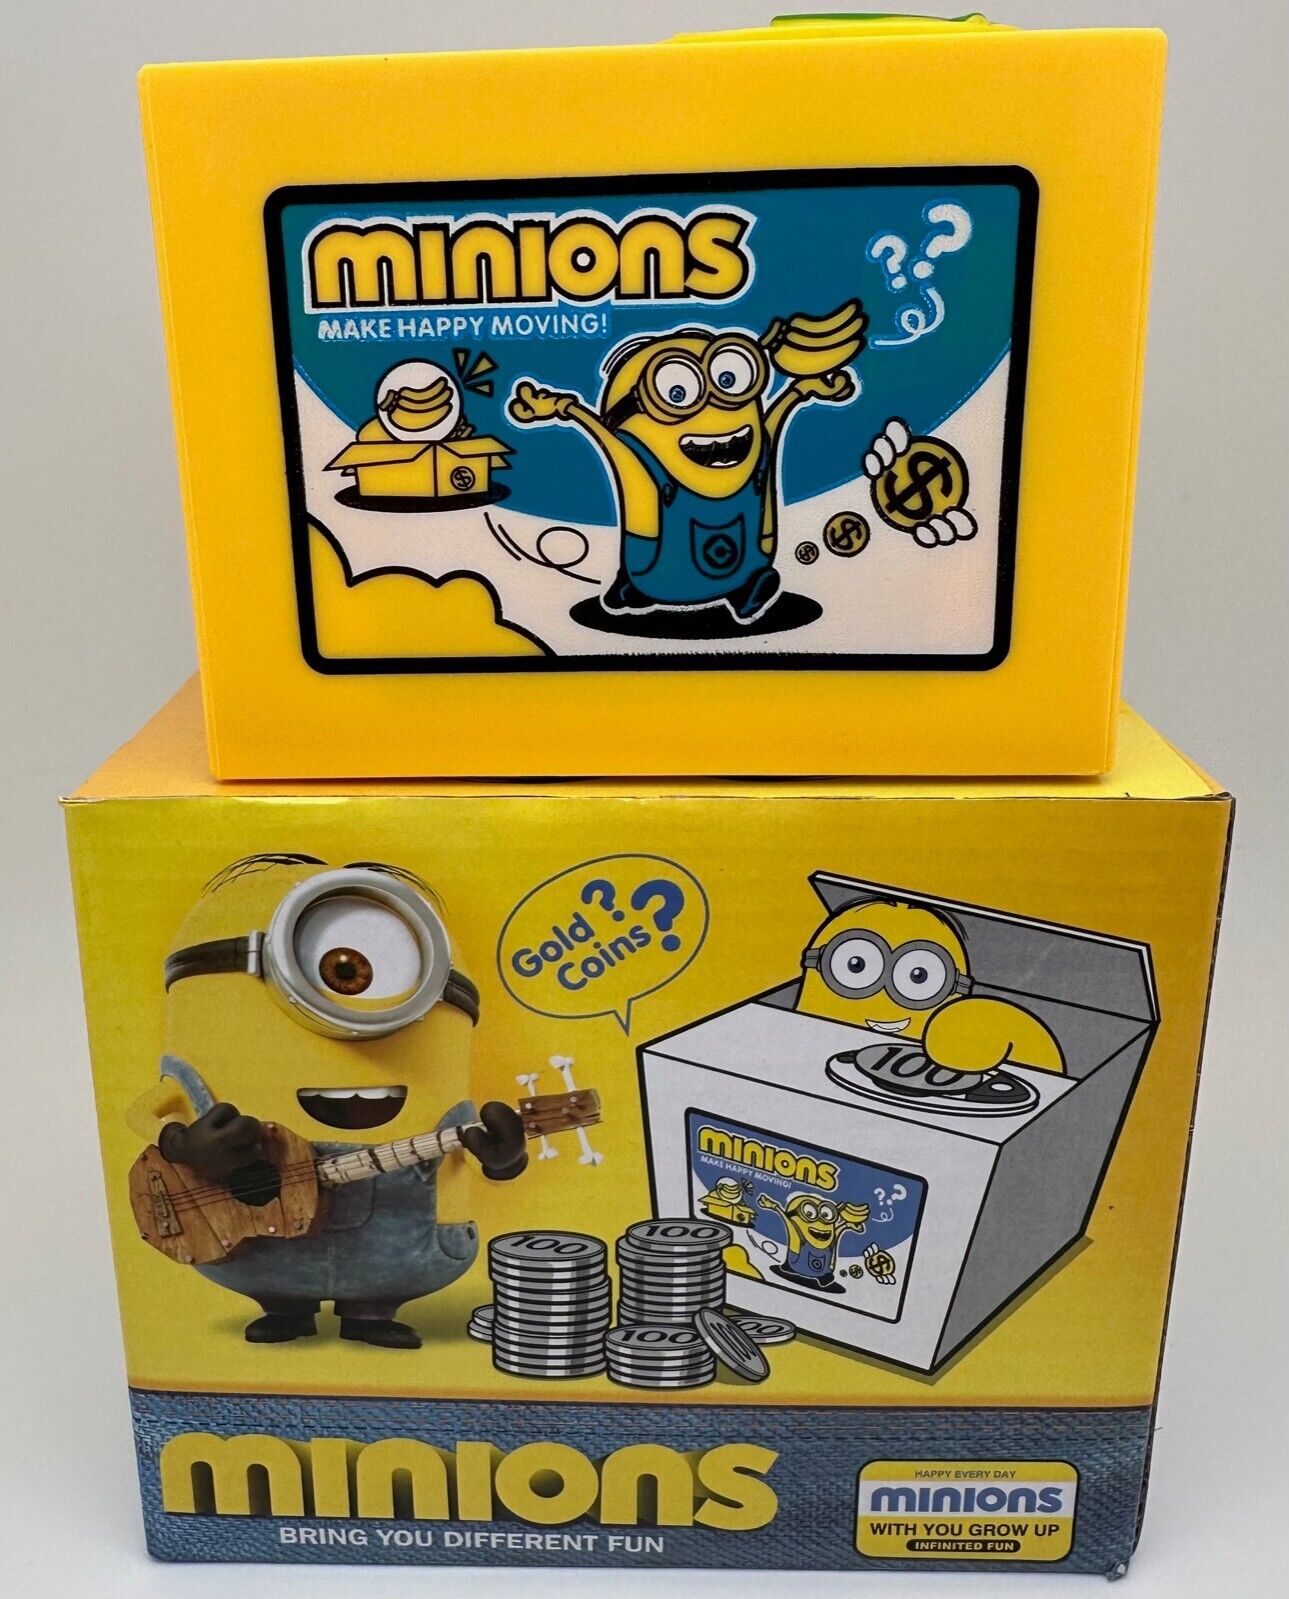 Despicable Me Minions Electronic Piggy Bank Mischief Coin Stealing Musical Bank